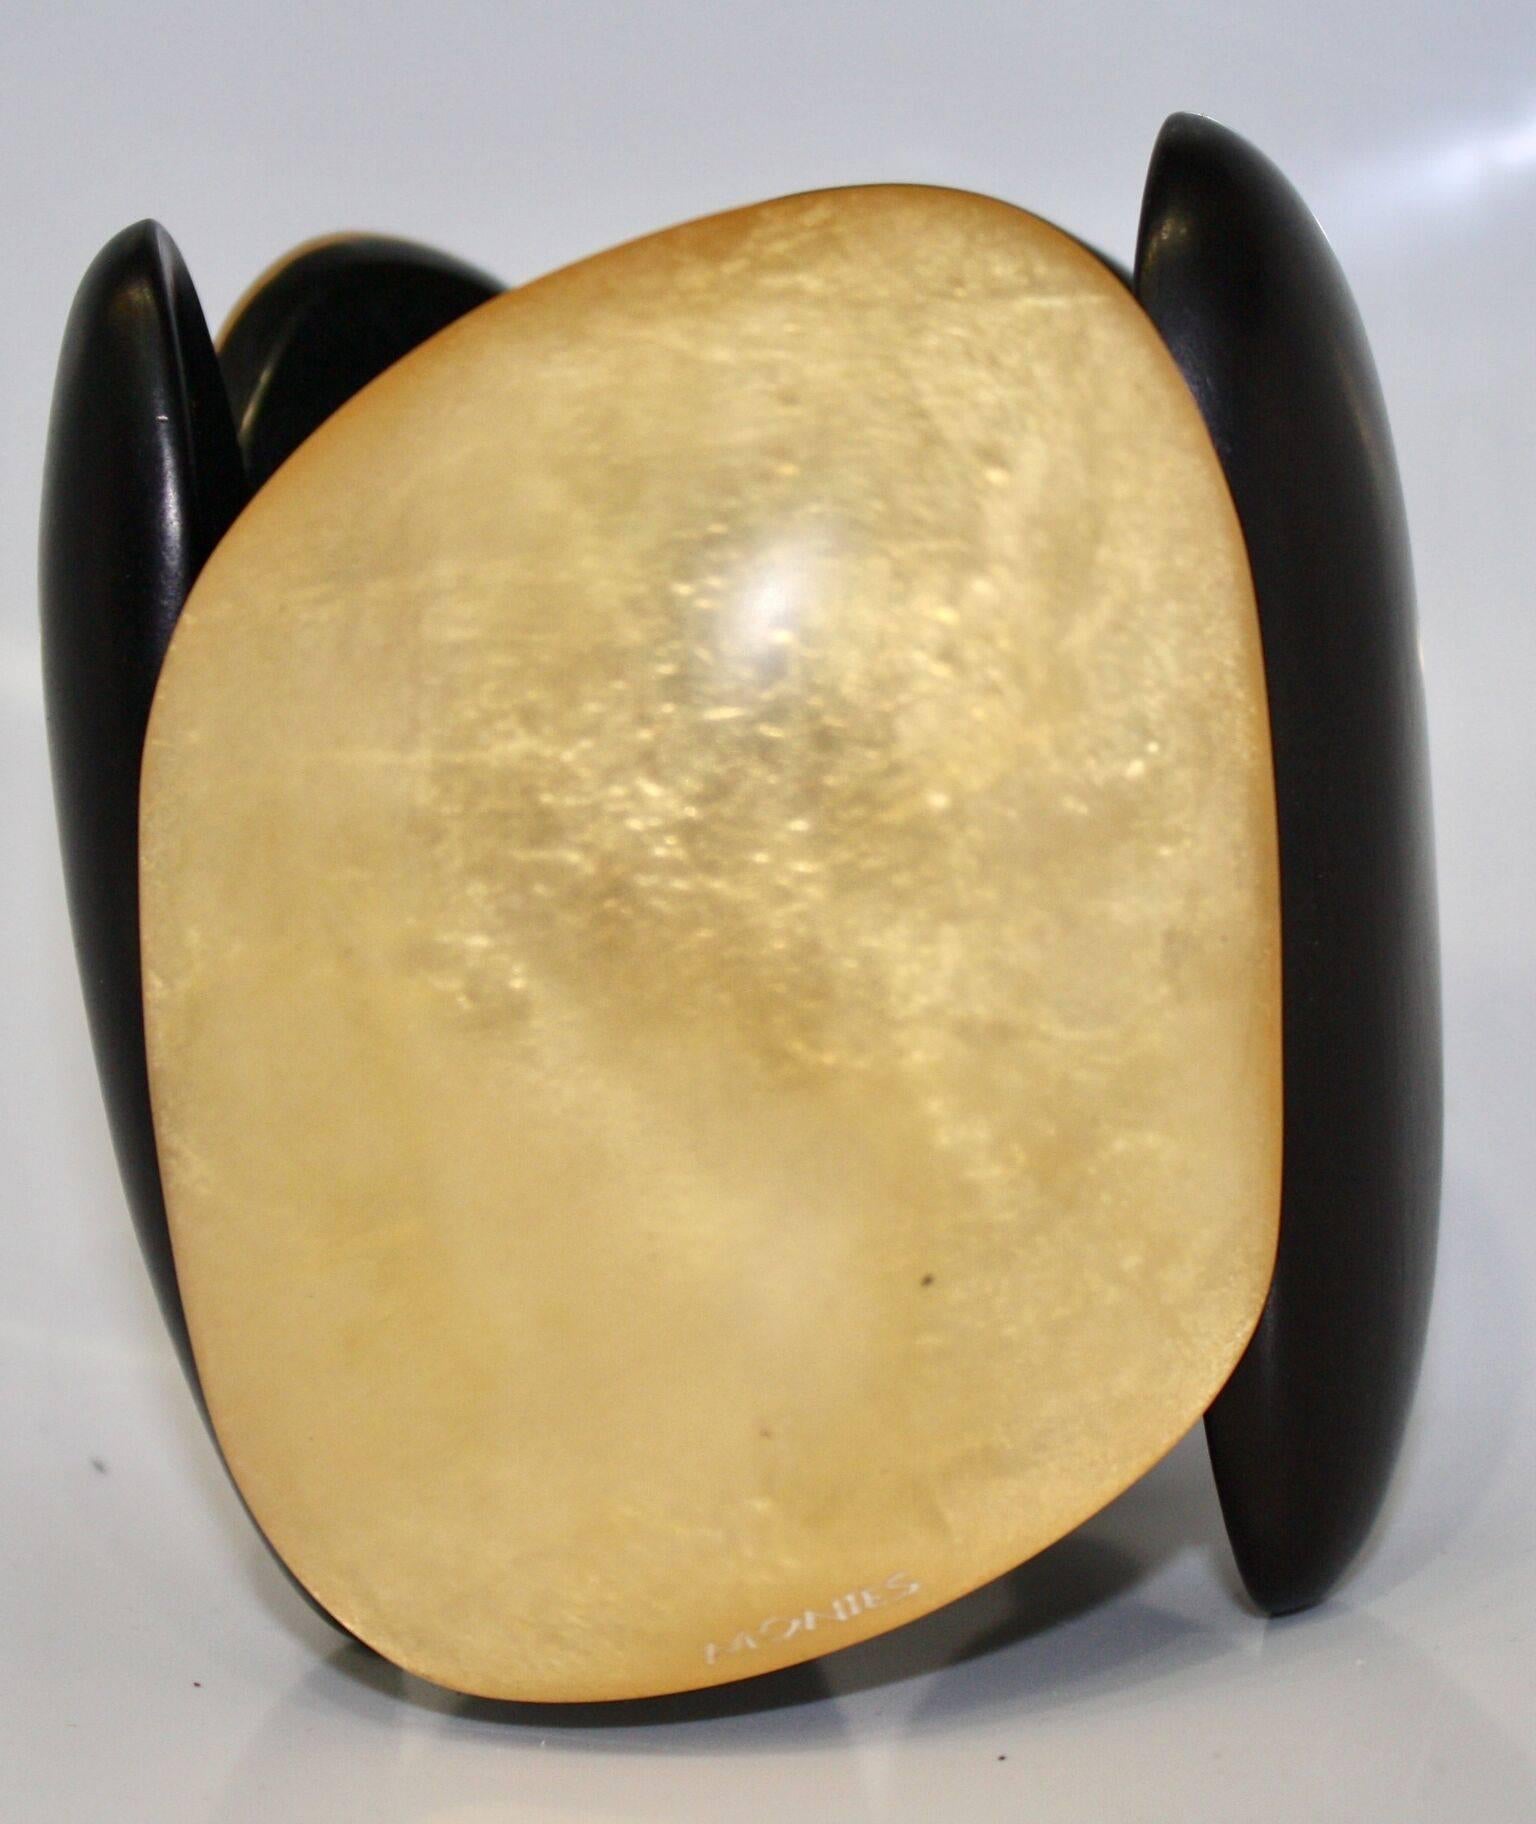 Ebony wood and gold leaf polyester stretch bracelet from Monies.  Longest element is 3.75